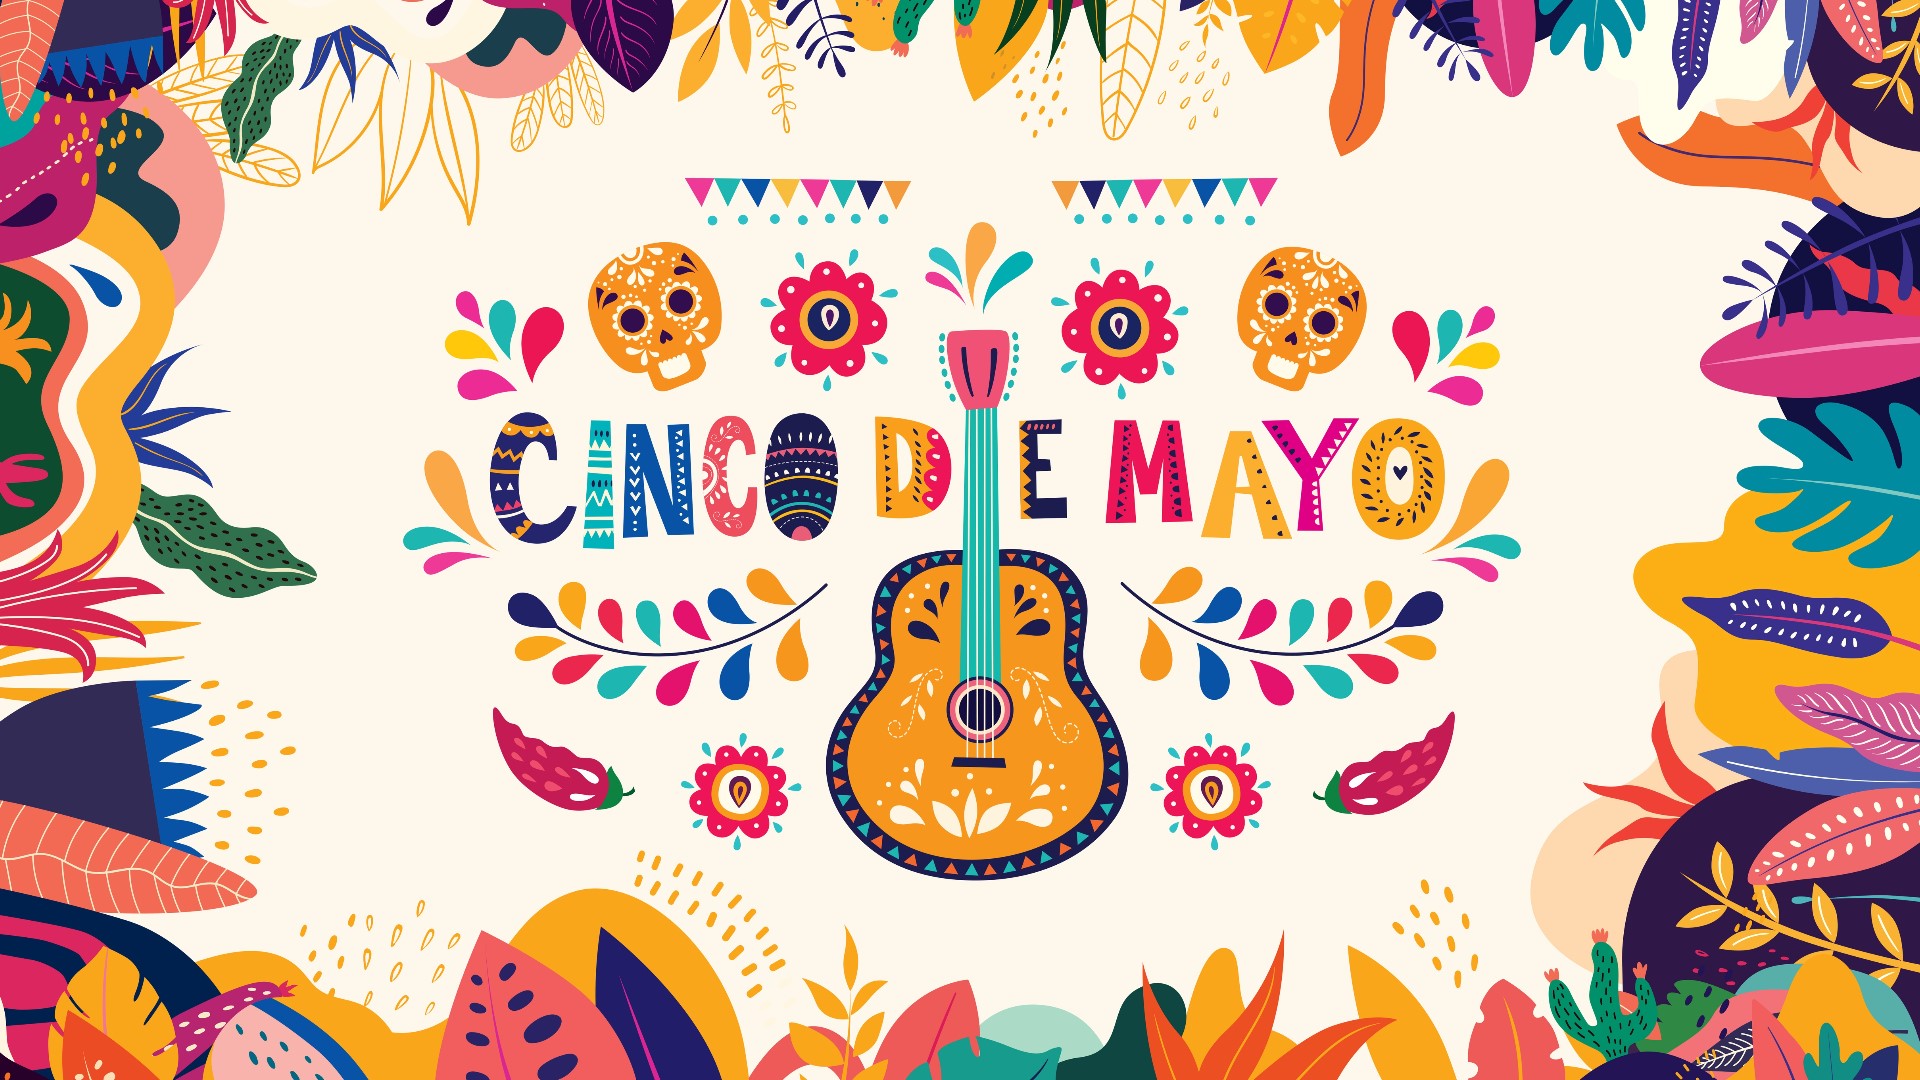 Cinco de Mayo commemorates the Mexican army's unlikely victory over the French forces of Napoleon III on May 5, 1862, at the Battle of Puebla.